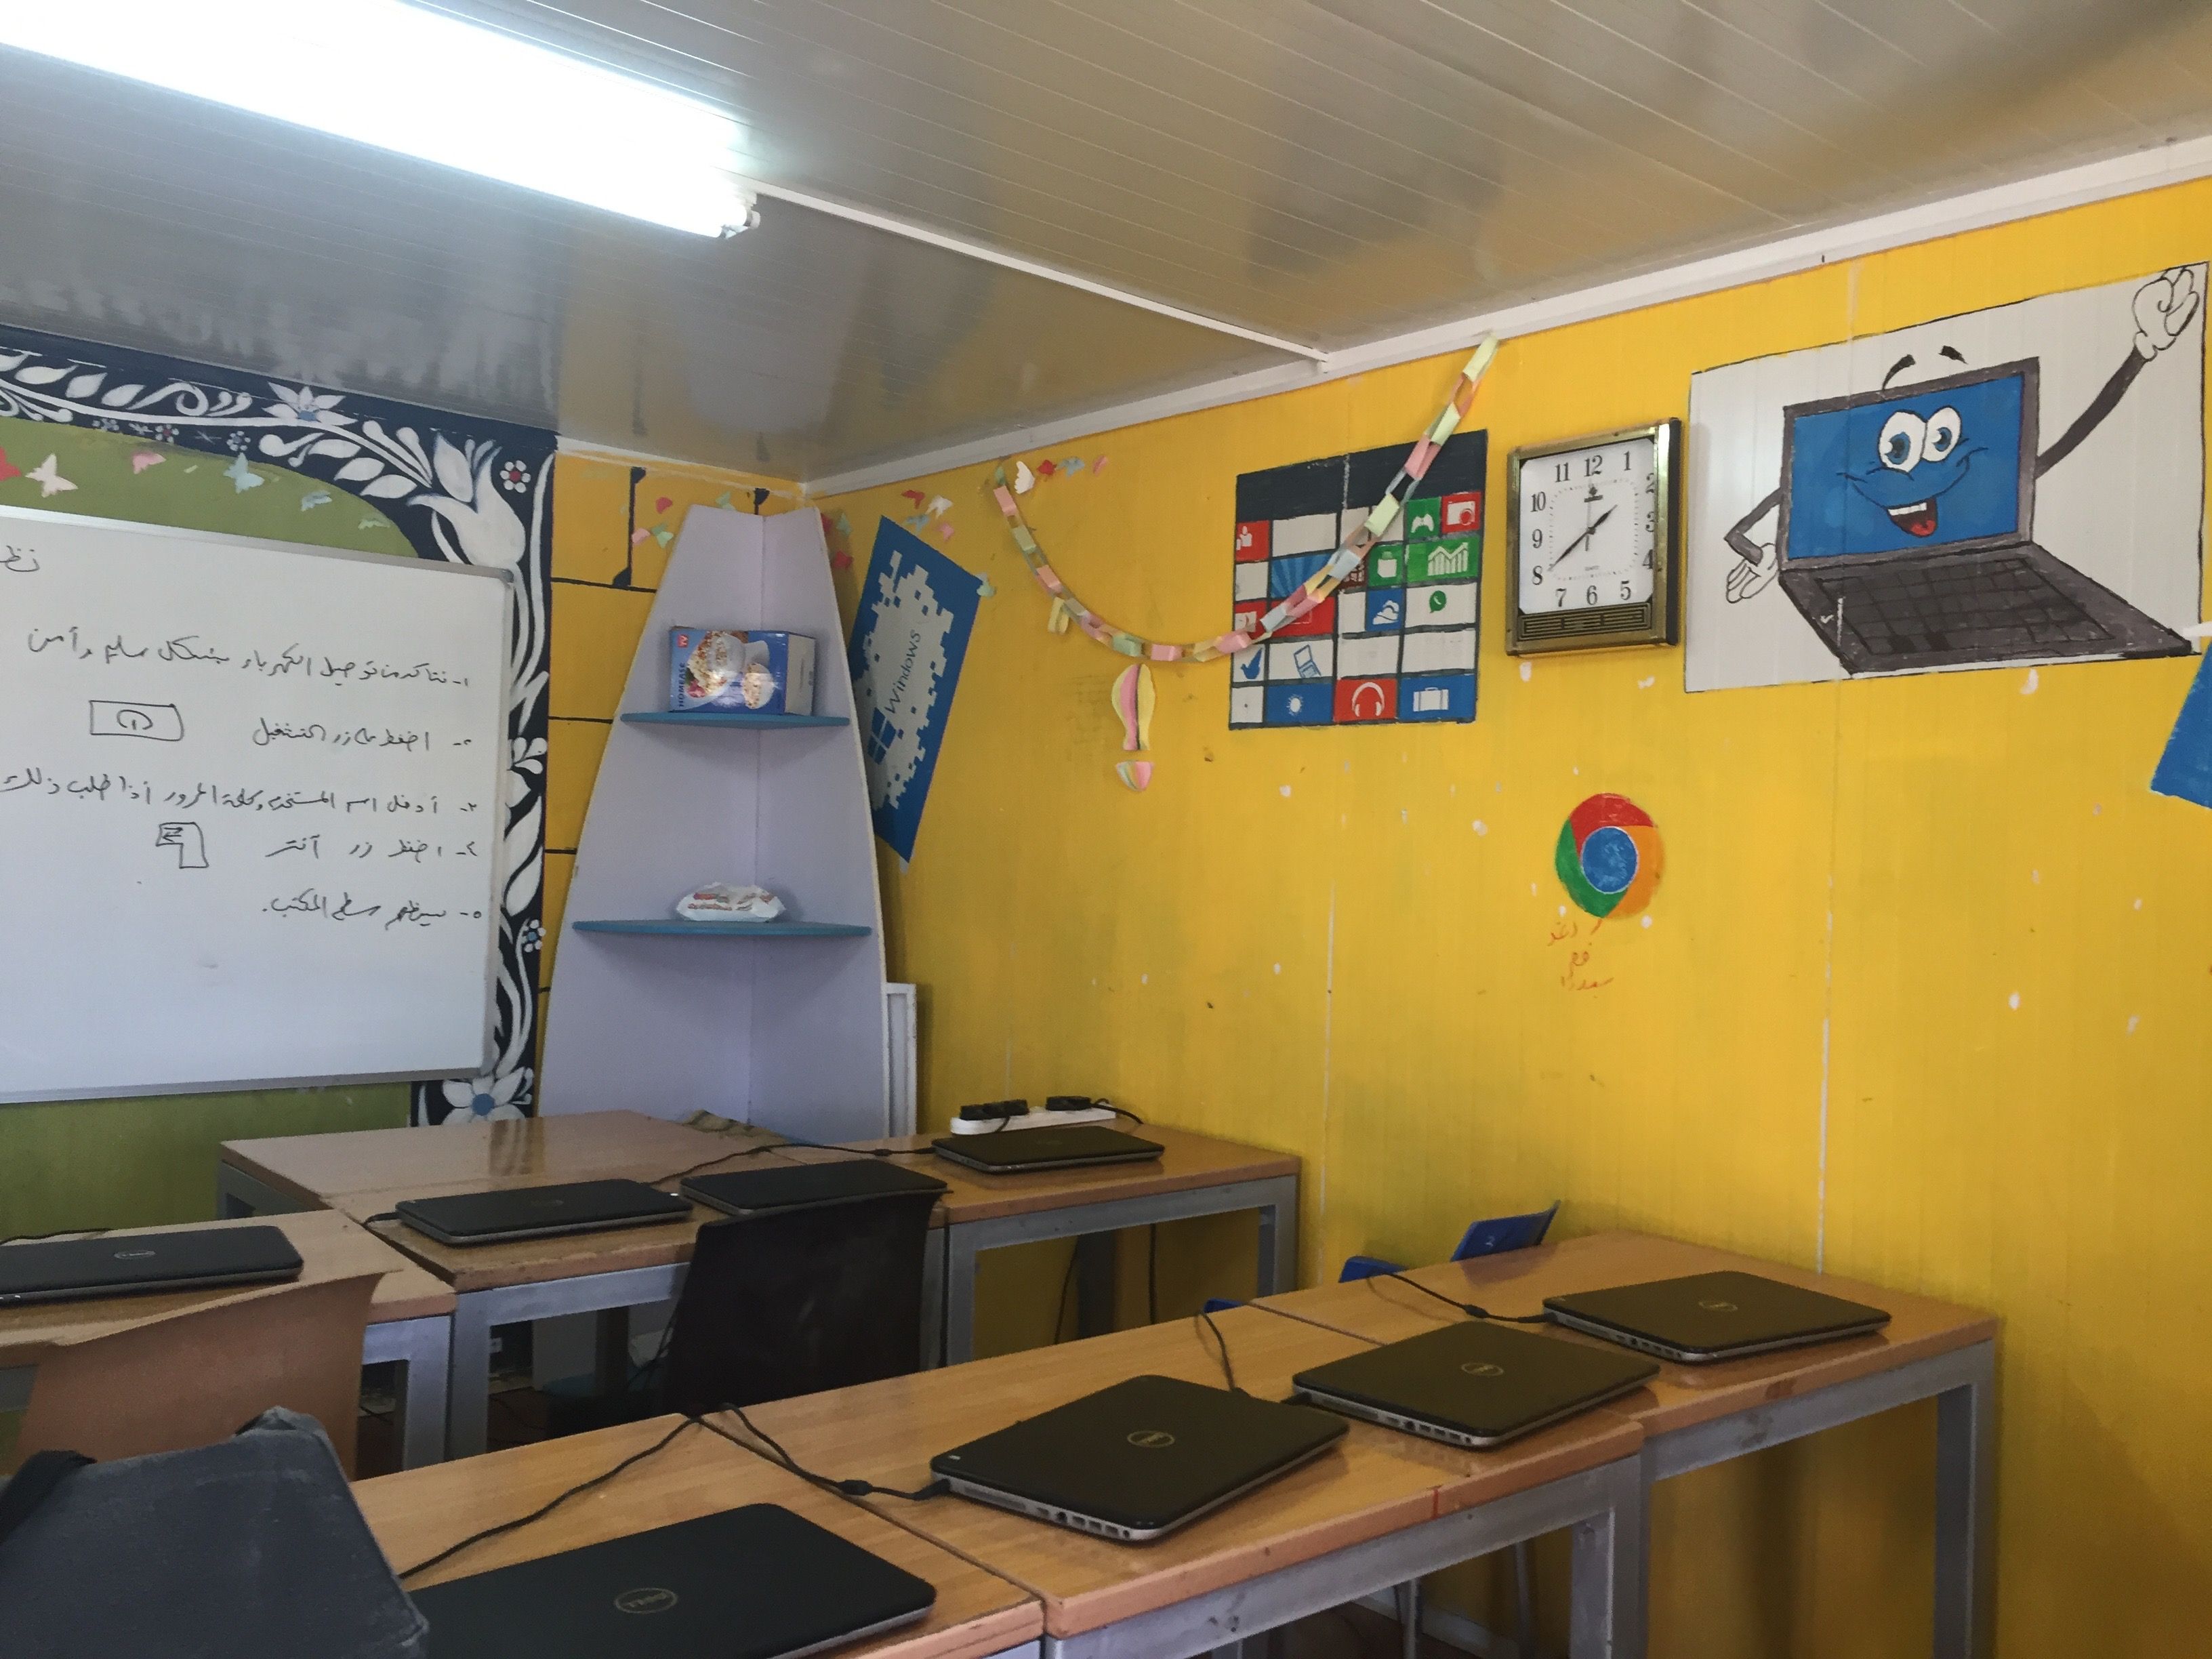 A computer classroom in Azraq Camp. Despite images for Google Chrome, the laptops cannot connect to use this browser for lessons. Image by Rachel Townzen. Jordan, 2016.